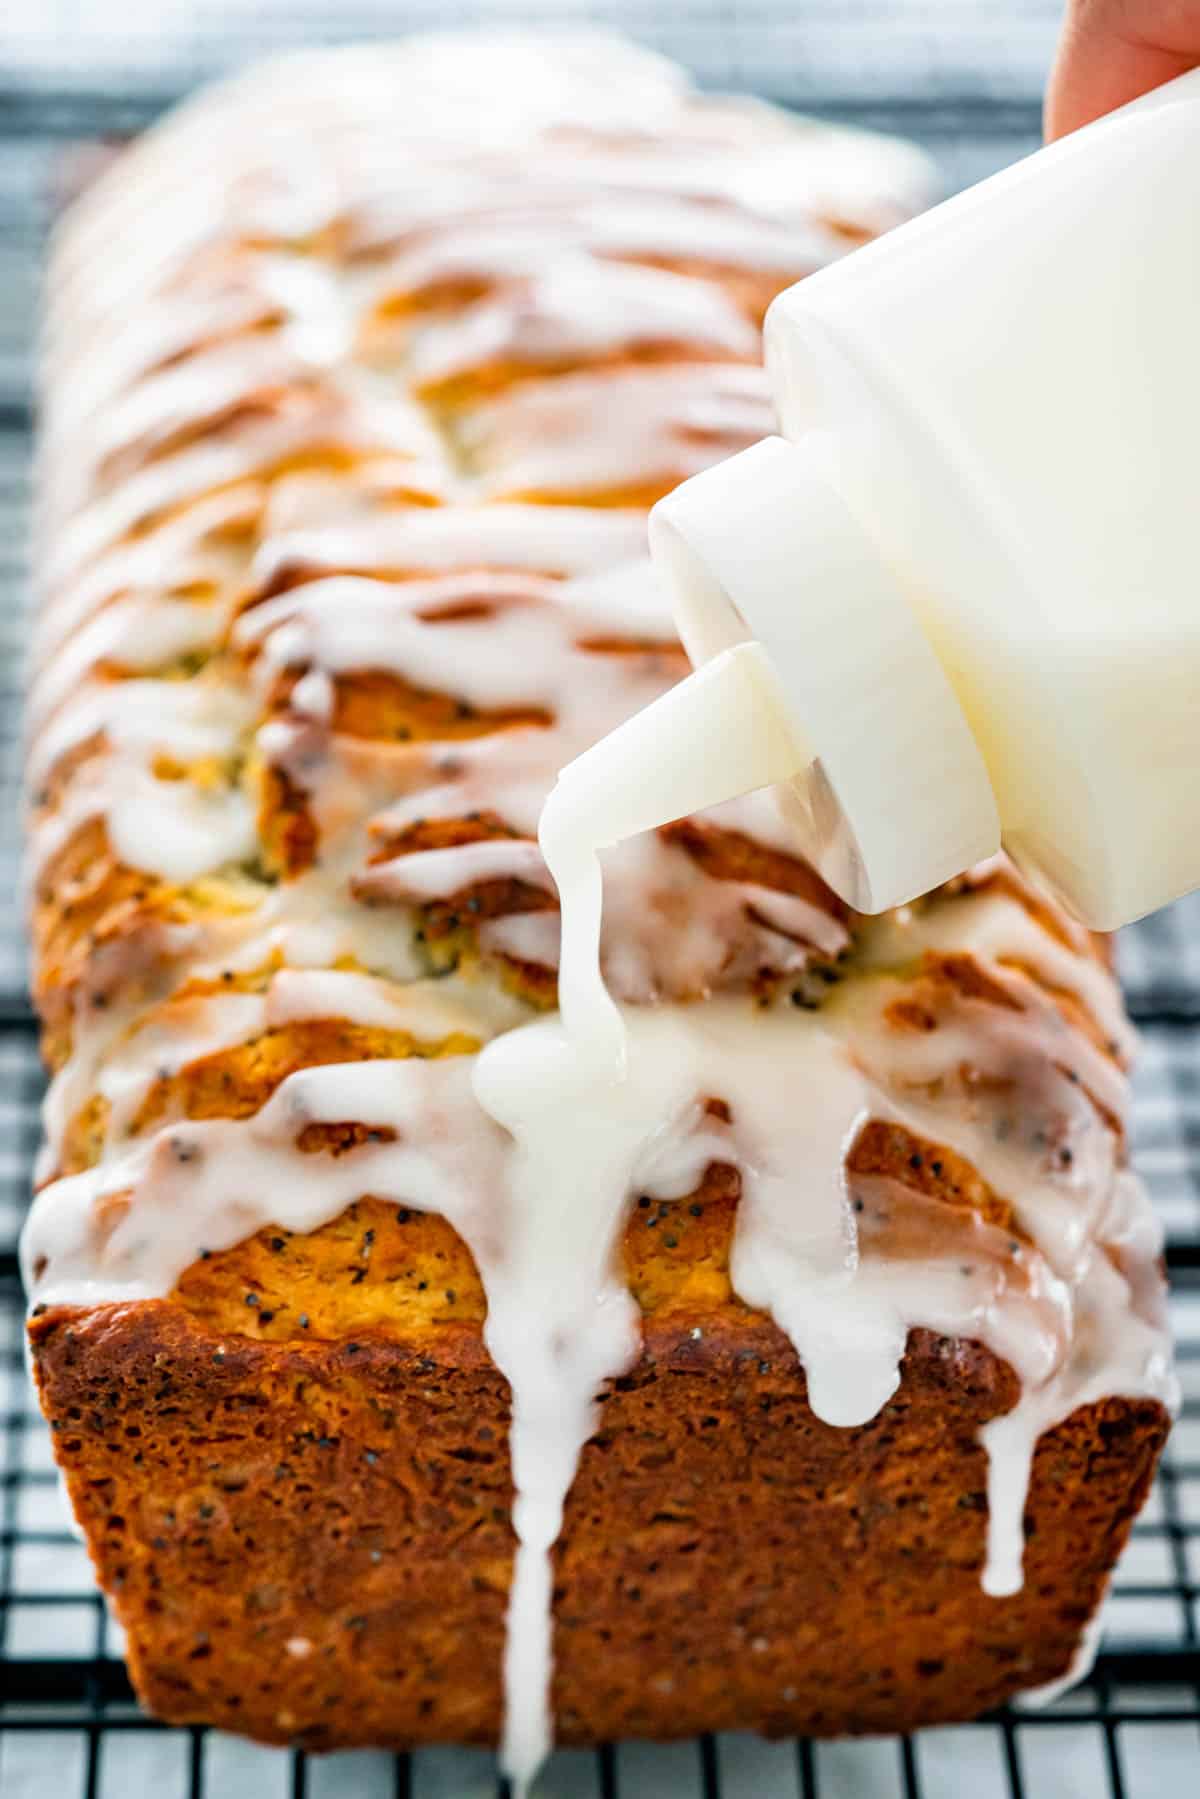 icing a lemon poppy seed bread with lemon icing